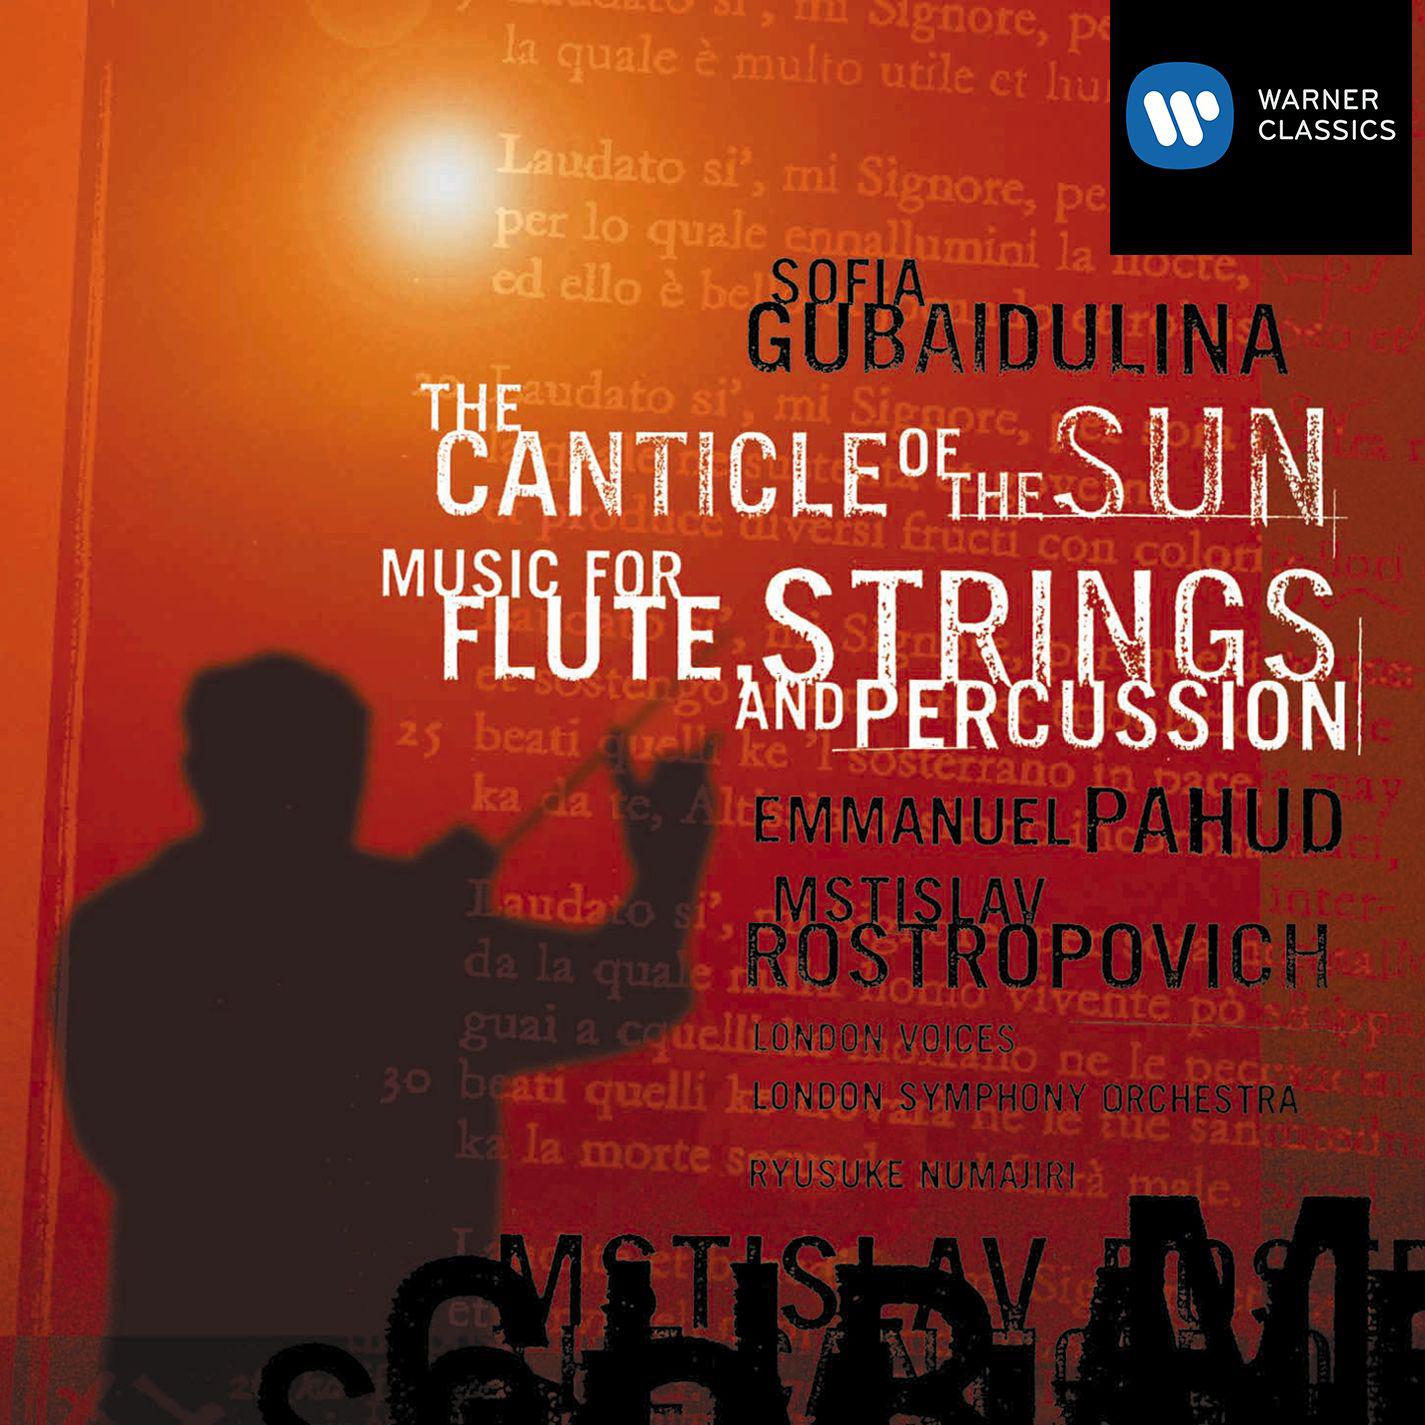 The Canticle of the Sun, for Cello, Chamber Choir and Percussion: No. 12, "Laudate et benedicete mi Signore"